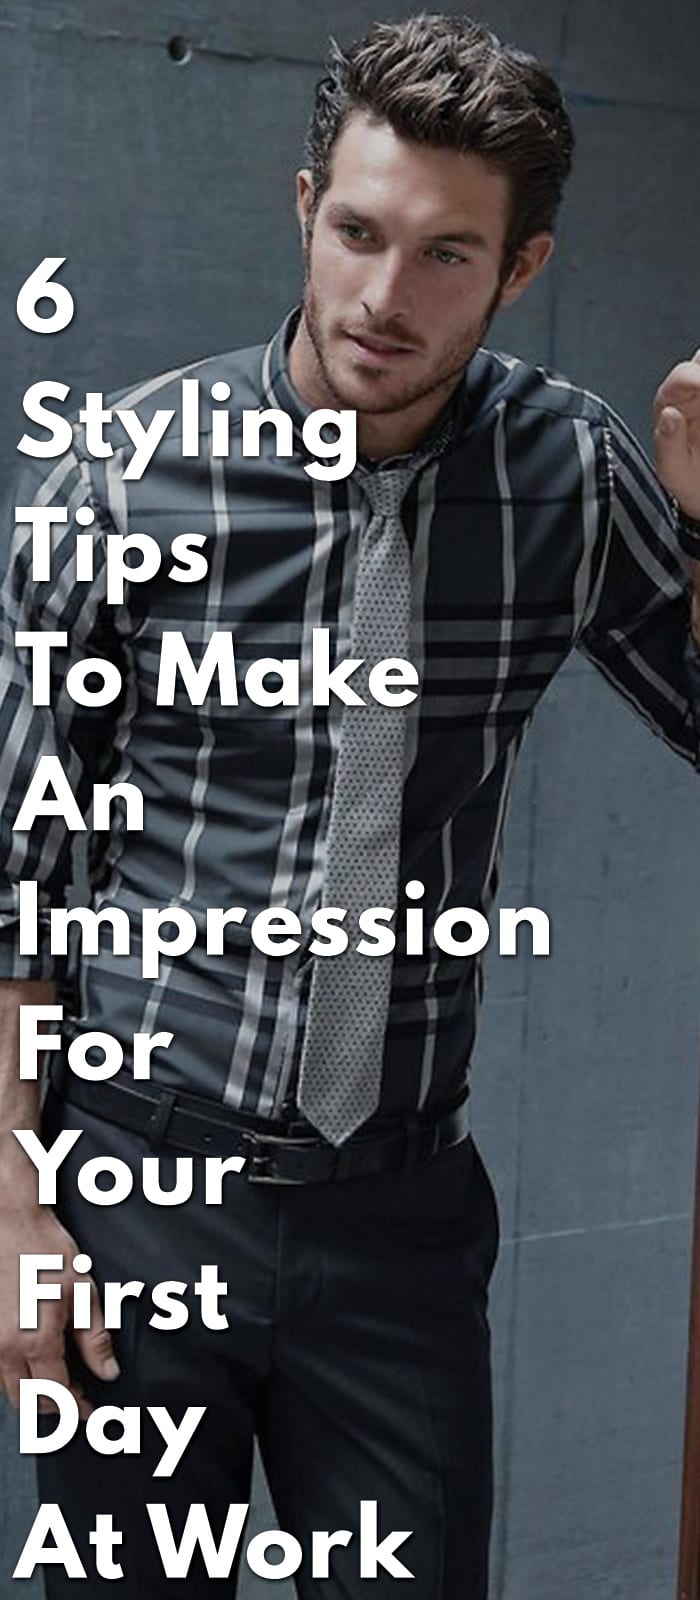 6-Styling-Tips-To-Make-An-Impression-For-Your-First-Day-At-Work